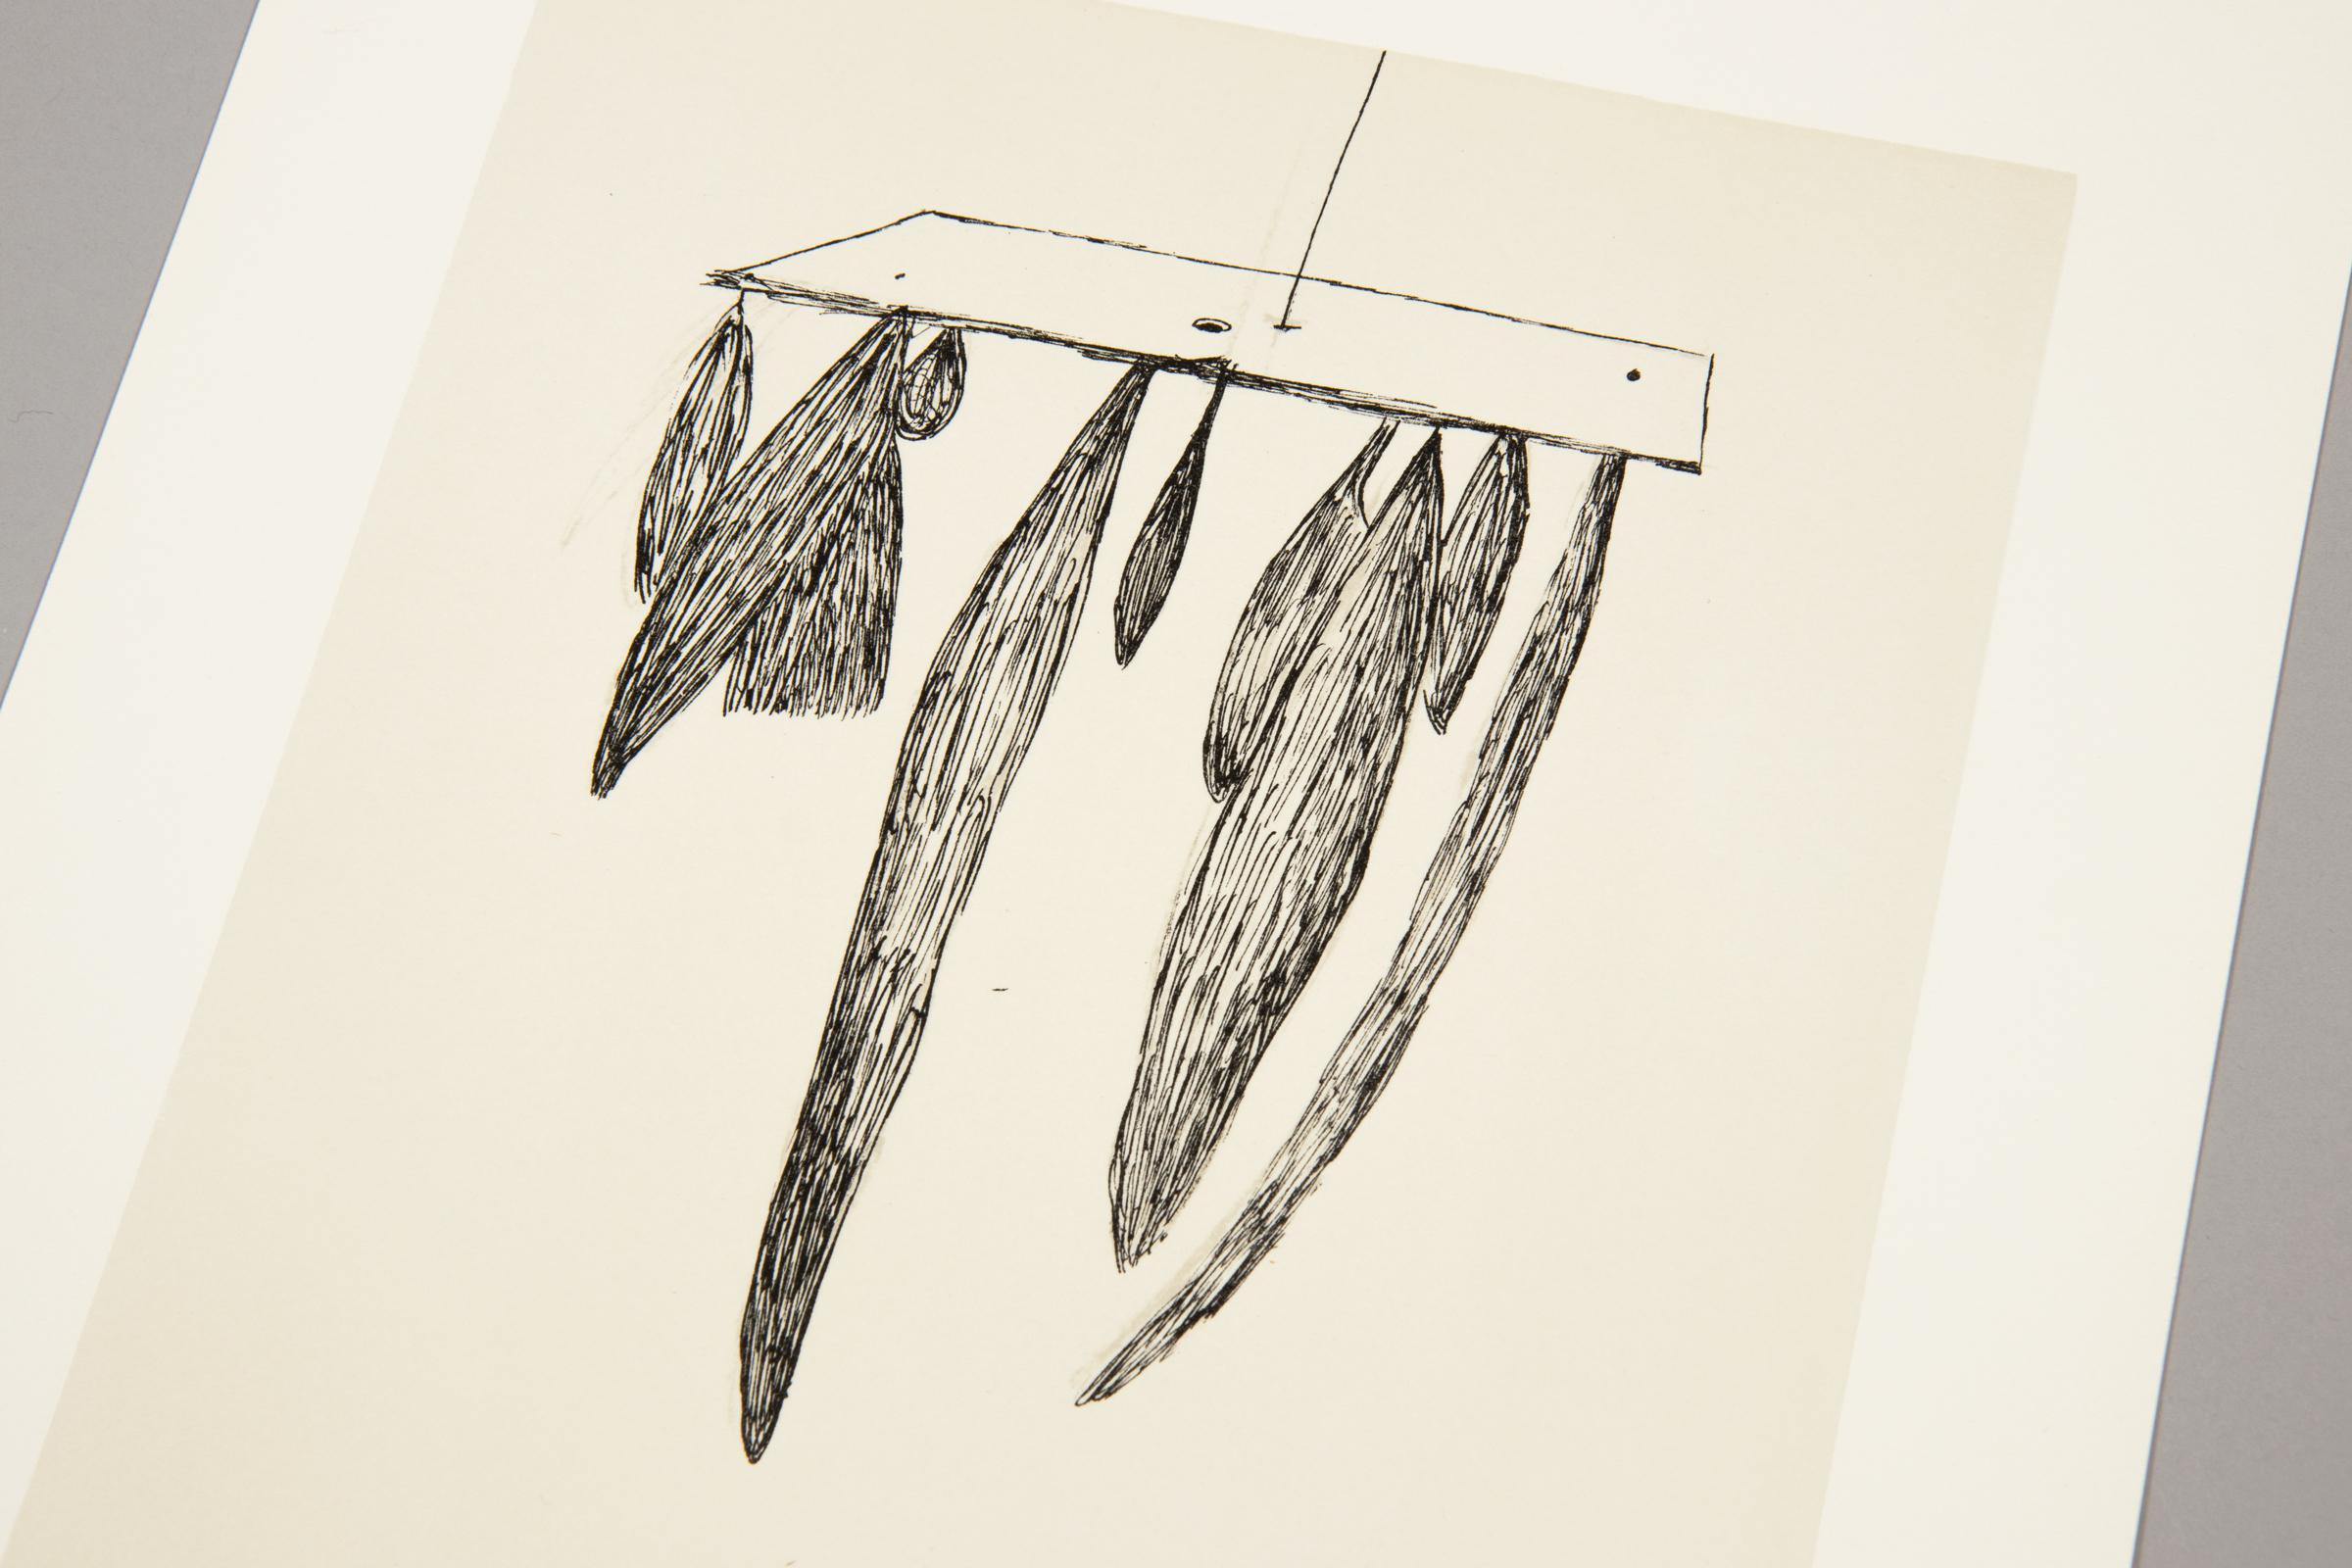 Louise Bourgeois, Sheaves (Version 1) - Original Hand-signed Print For Sale 1